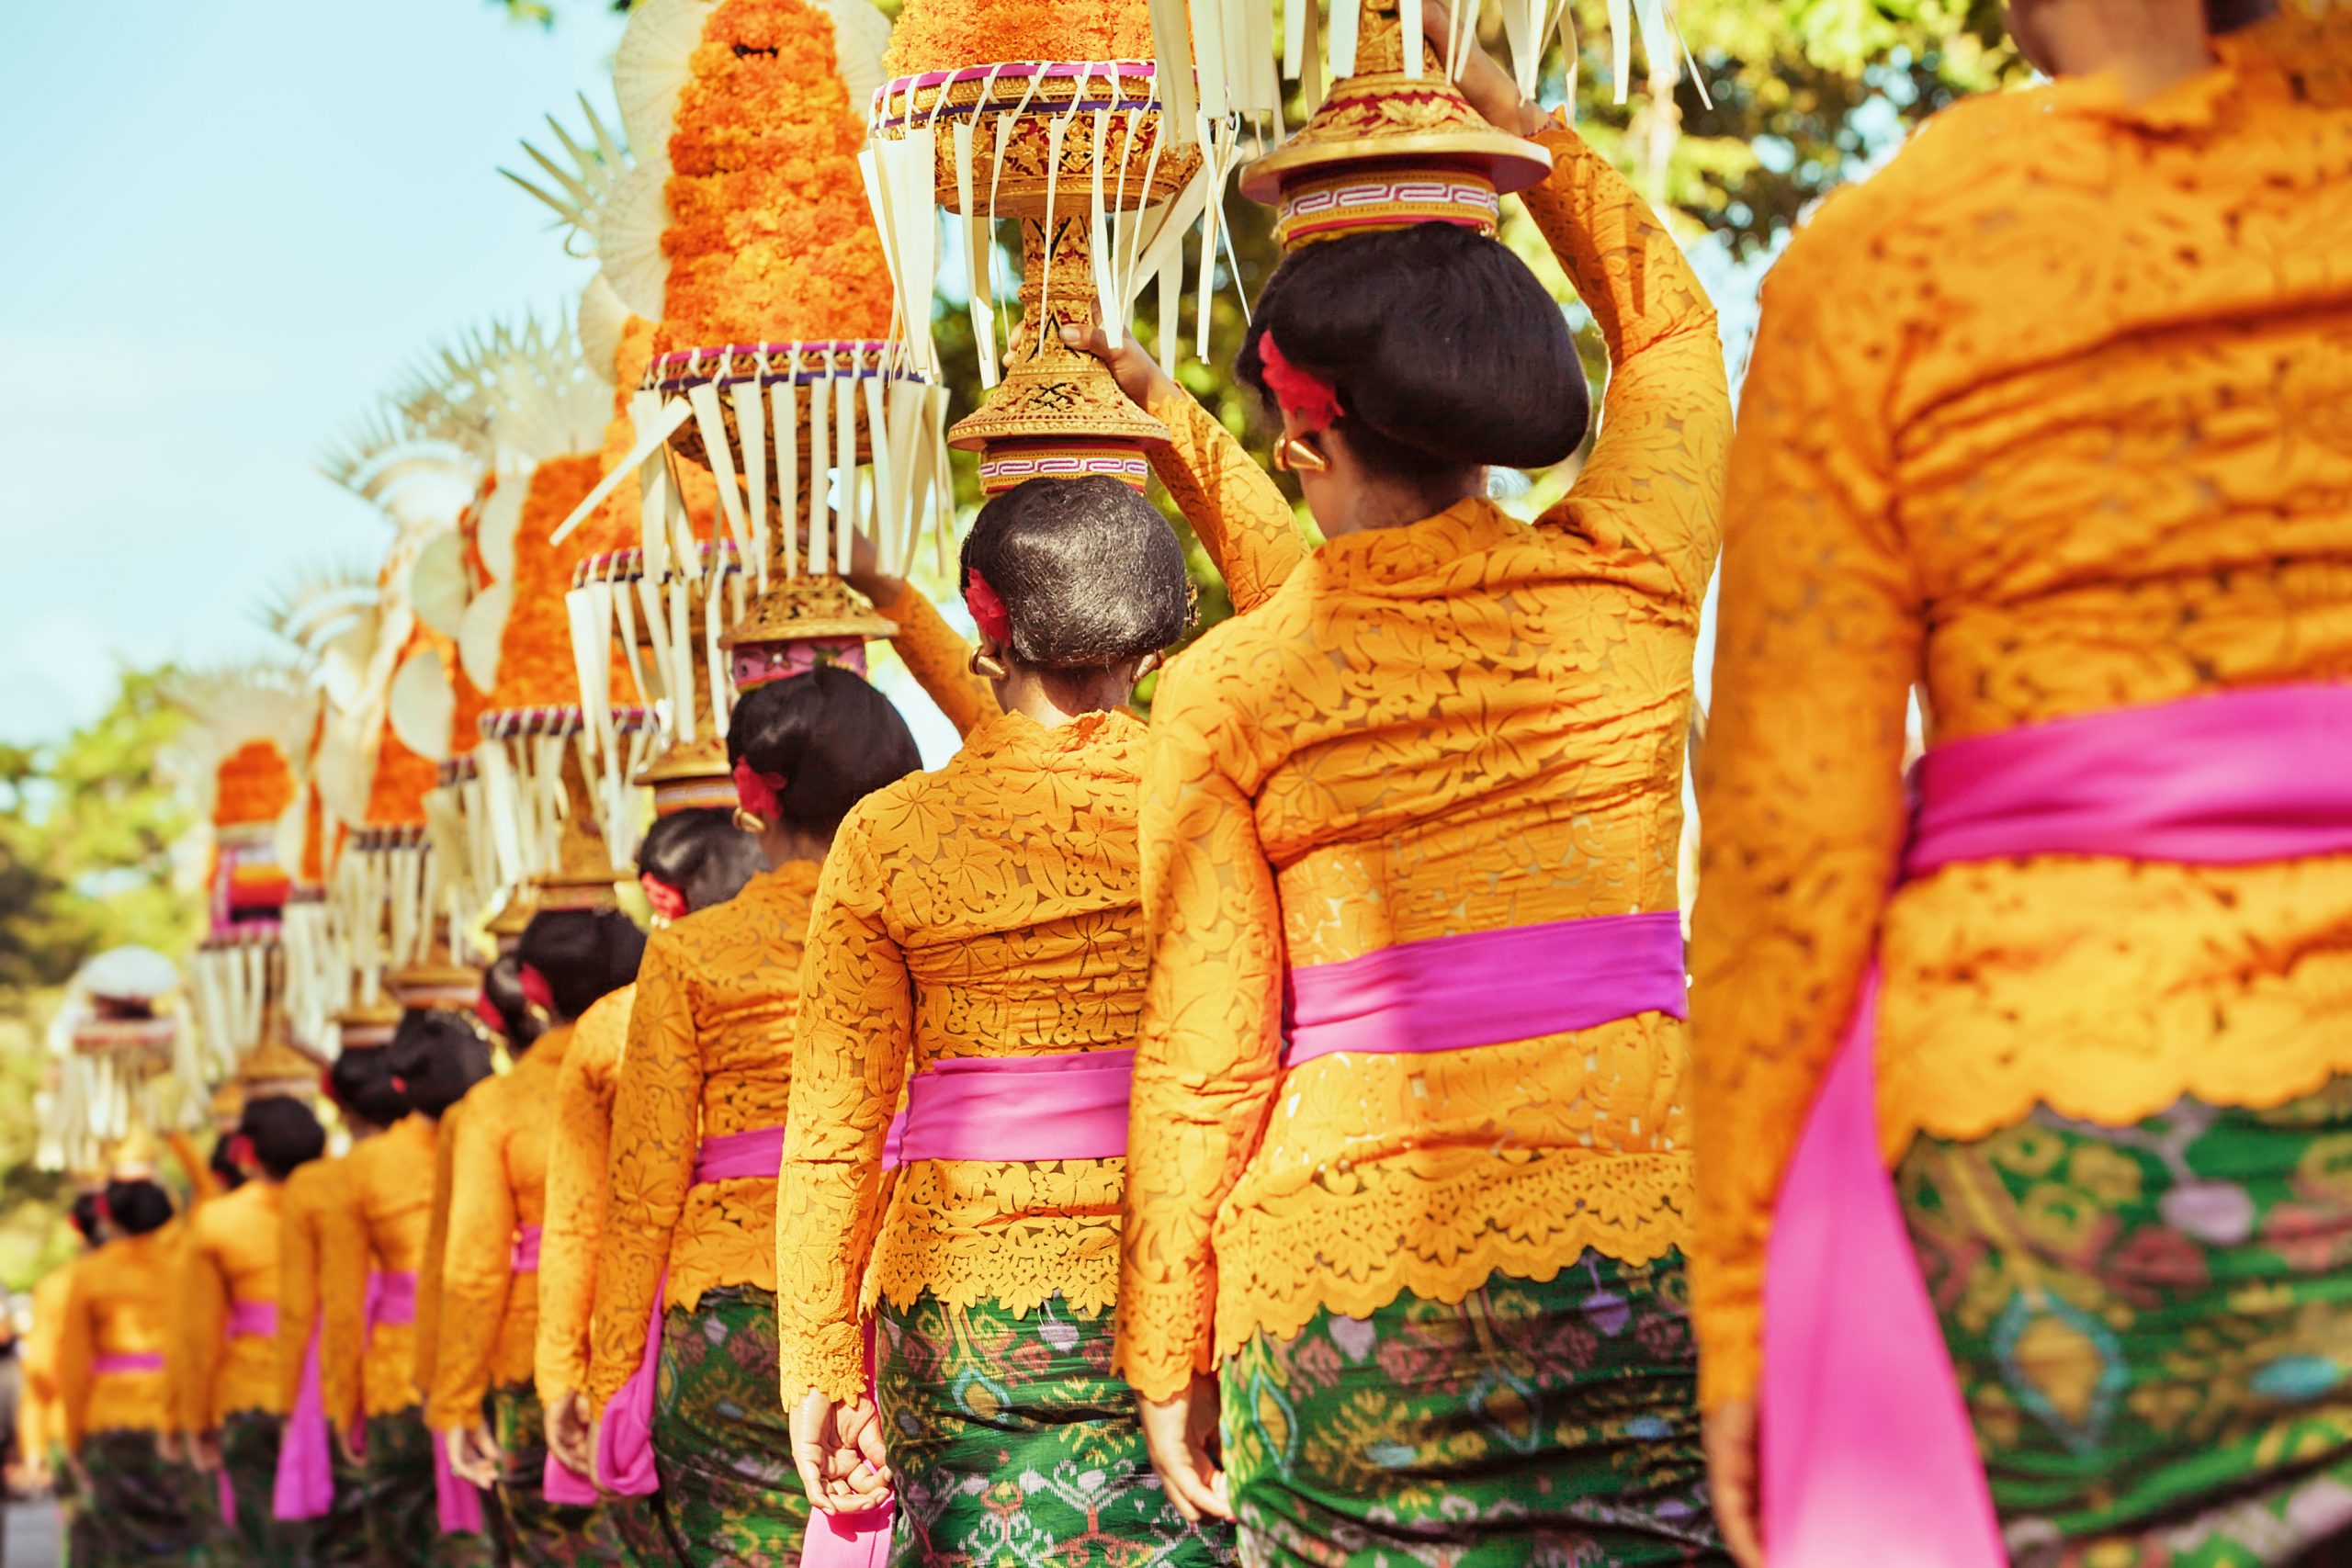  A group of women in traditional Javanese dress carrying offerings on their heads during a religious ceremony.